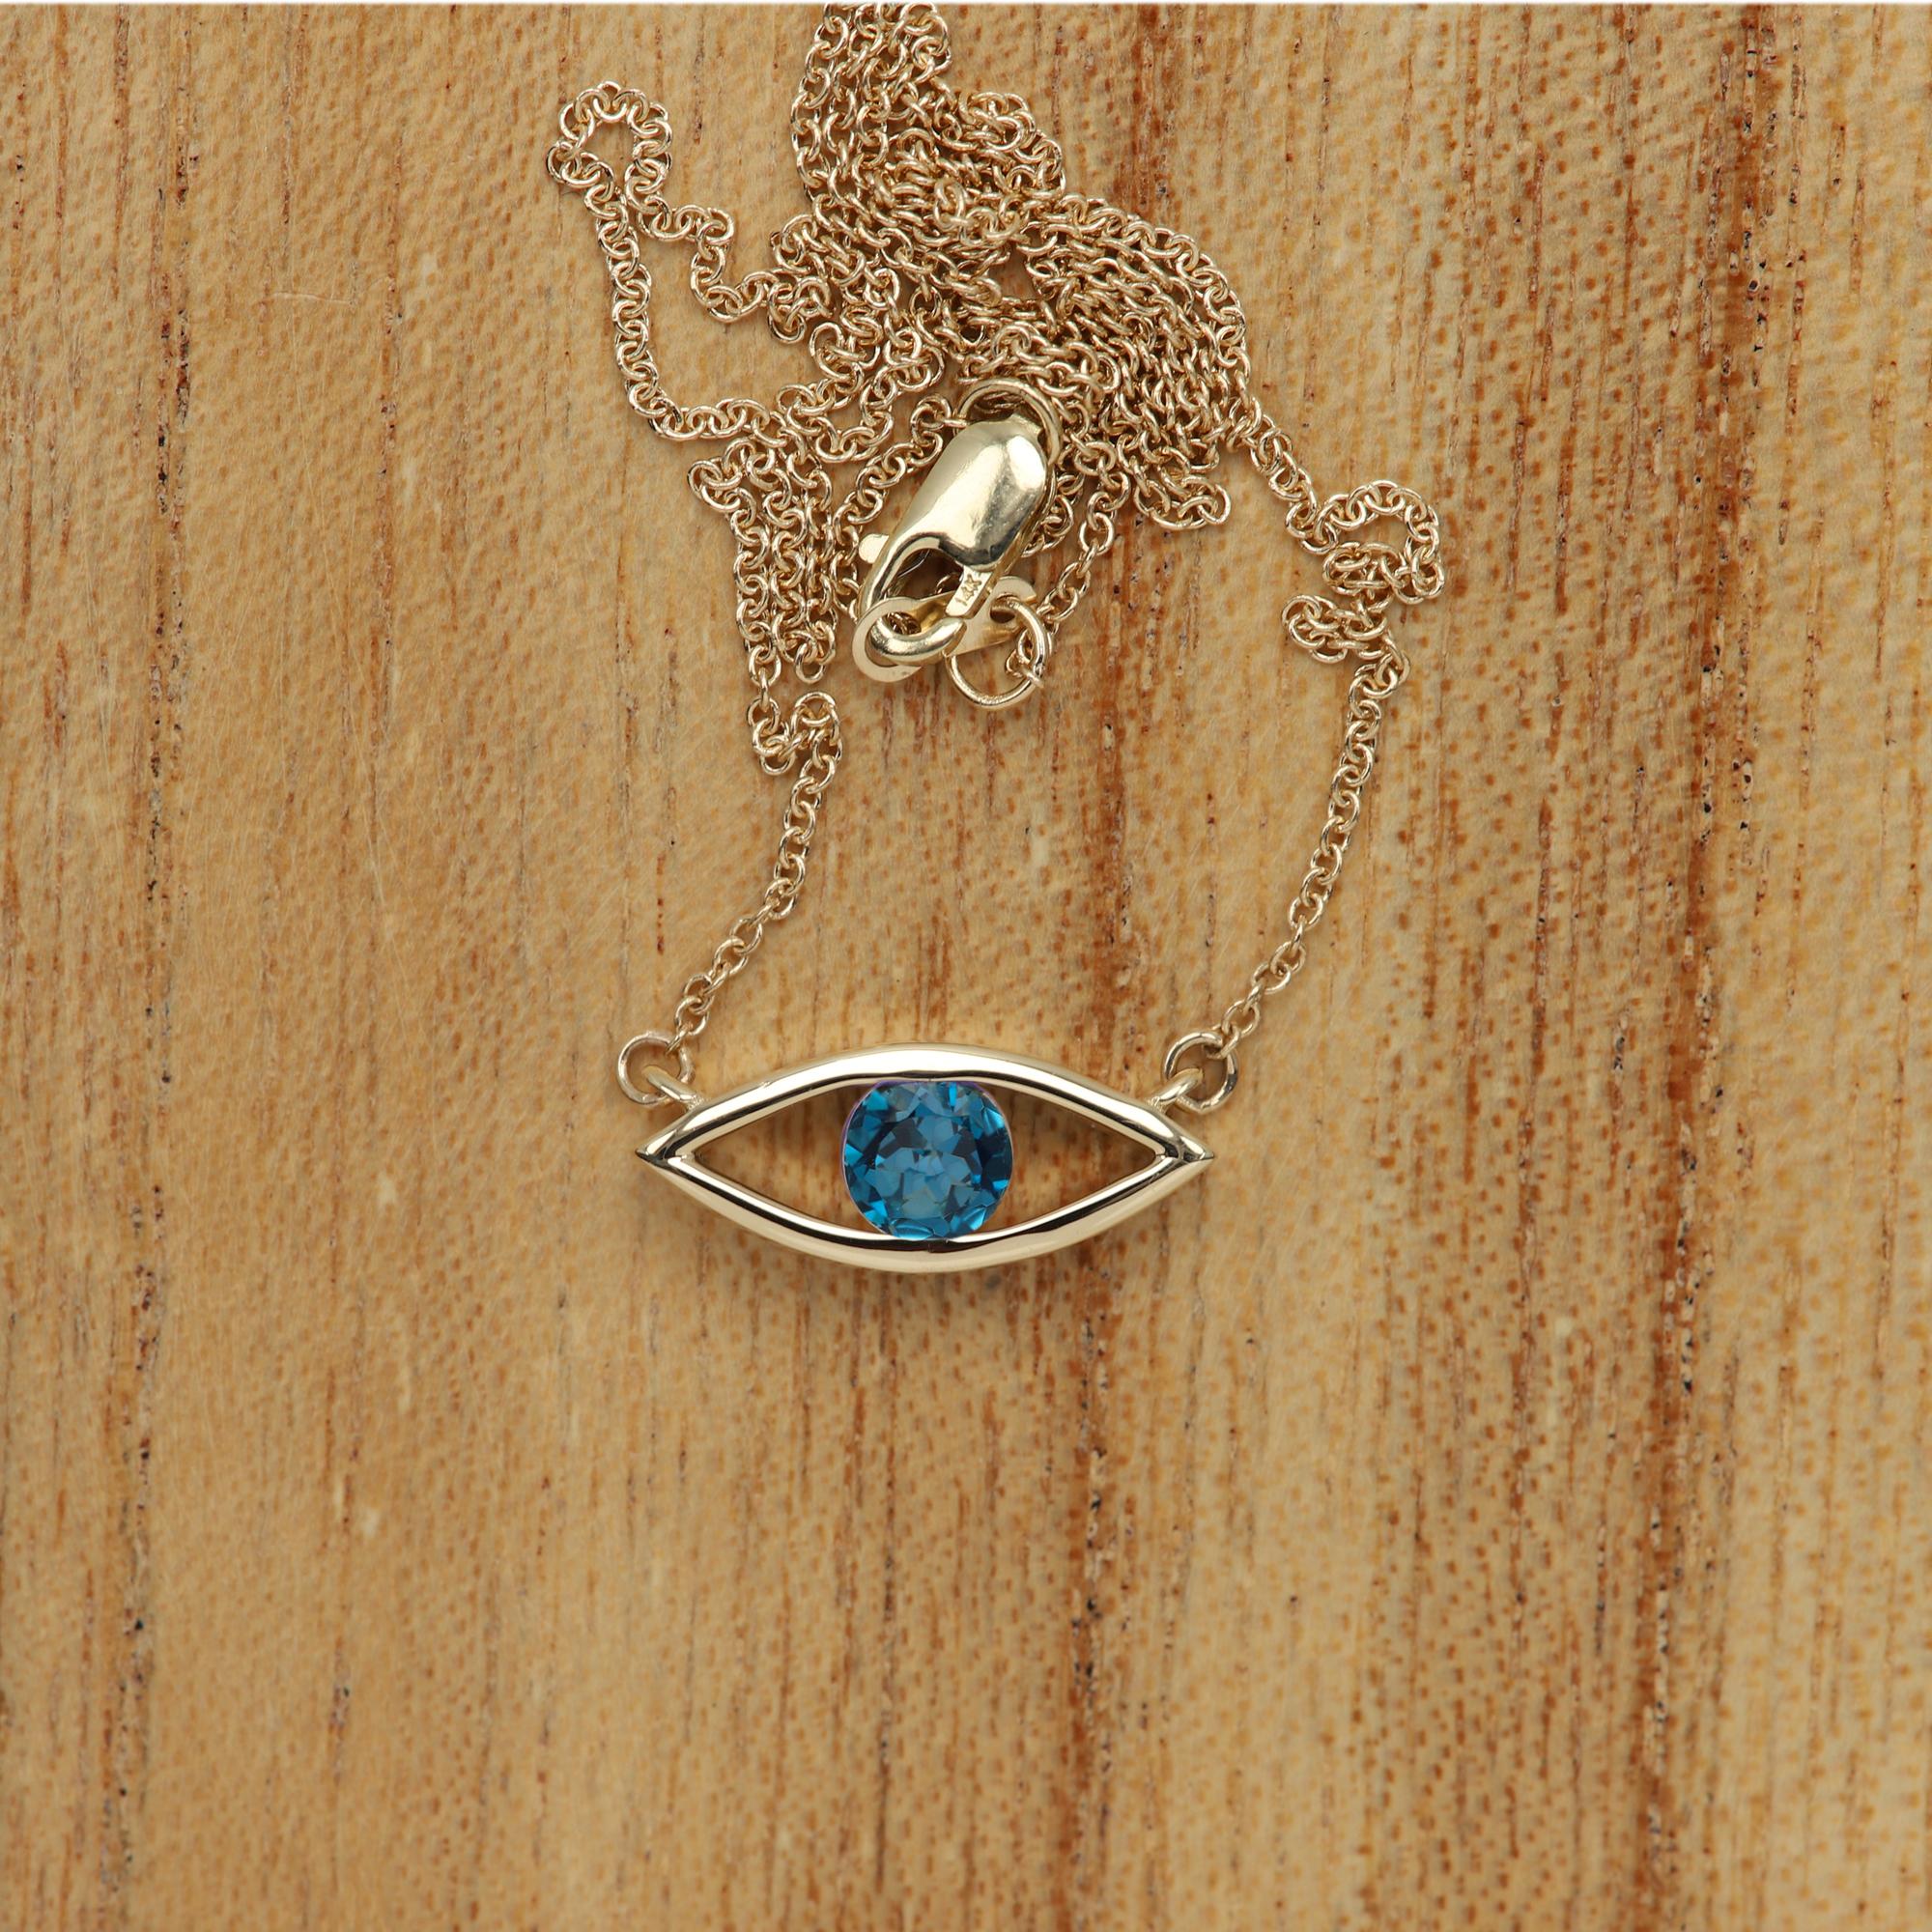 Evil Eye Necklace 14 Karat Yellow Gold Lond Blue Topaz Birthstone 0.50 Carat In New Condition For Sale In Brooklyn, NY